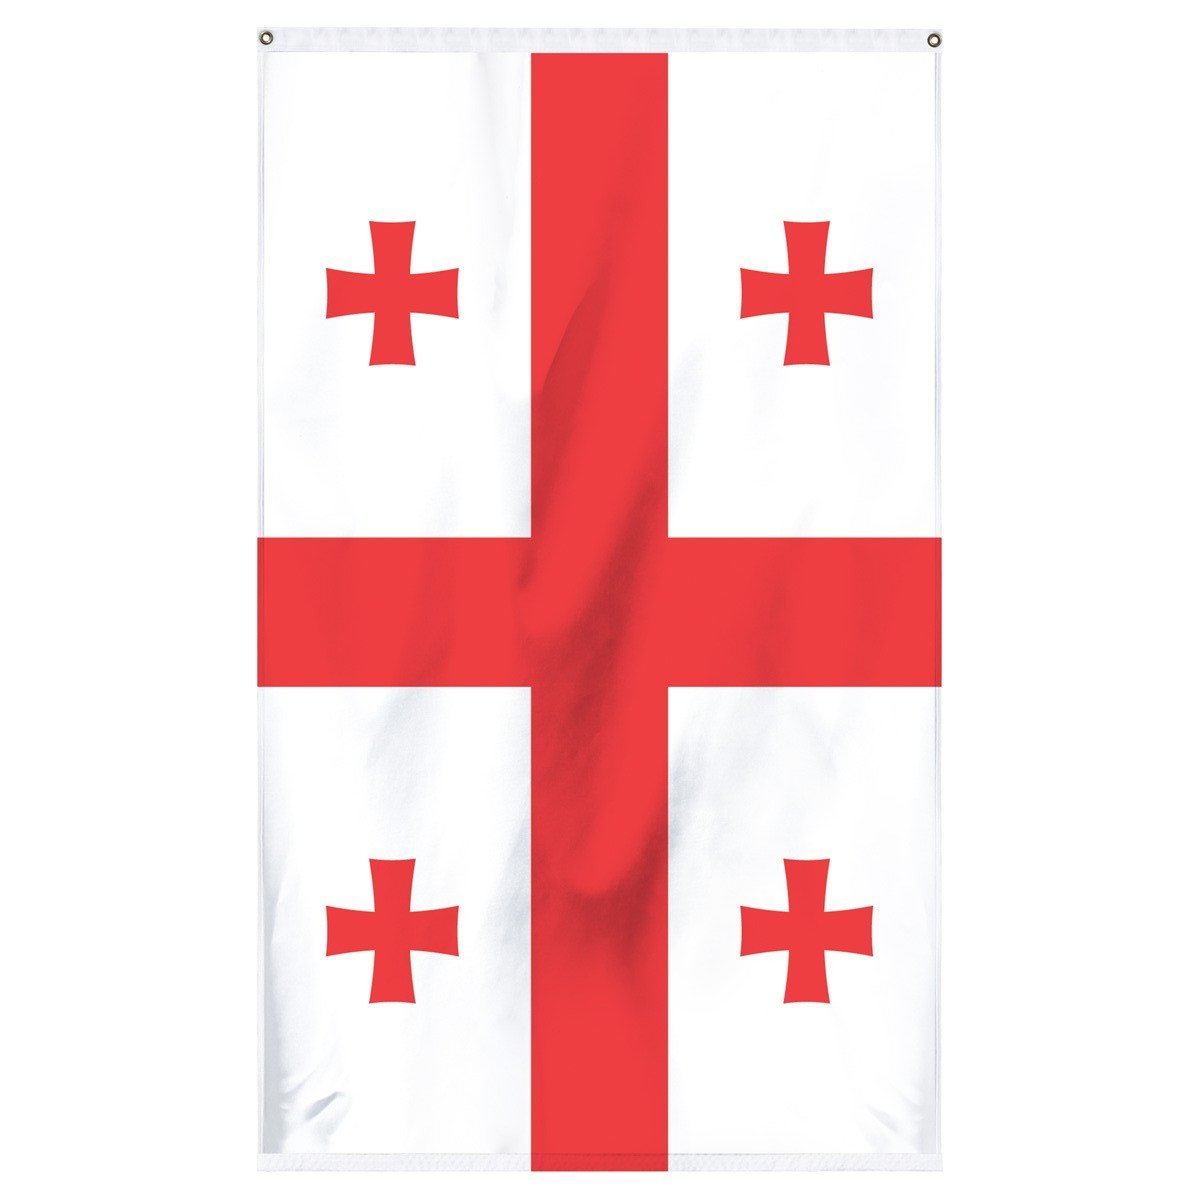 the official UN approved flag of the Georgia Republic for sale to buy online